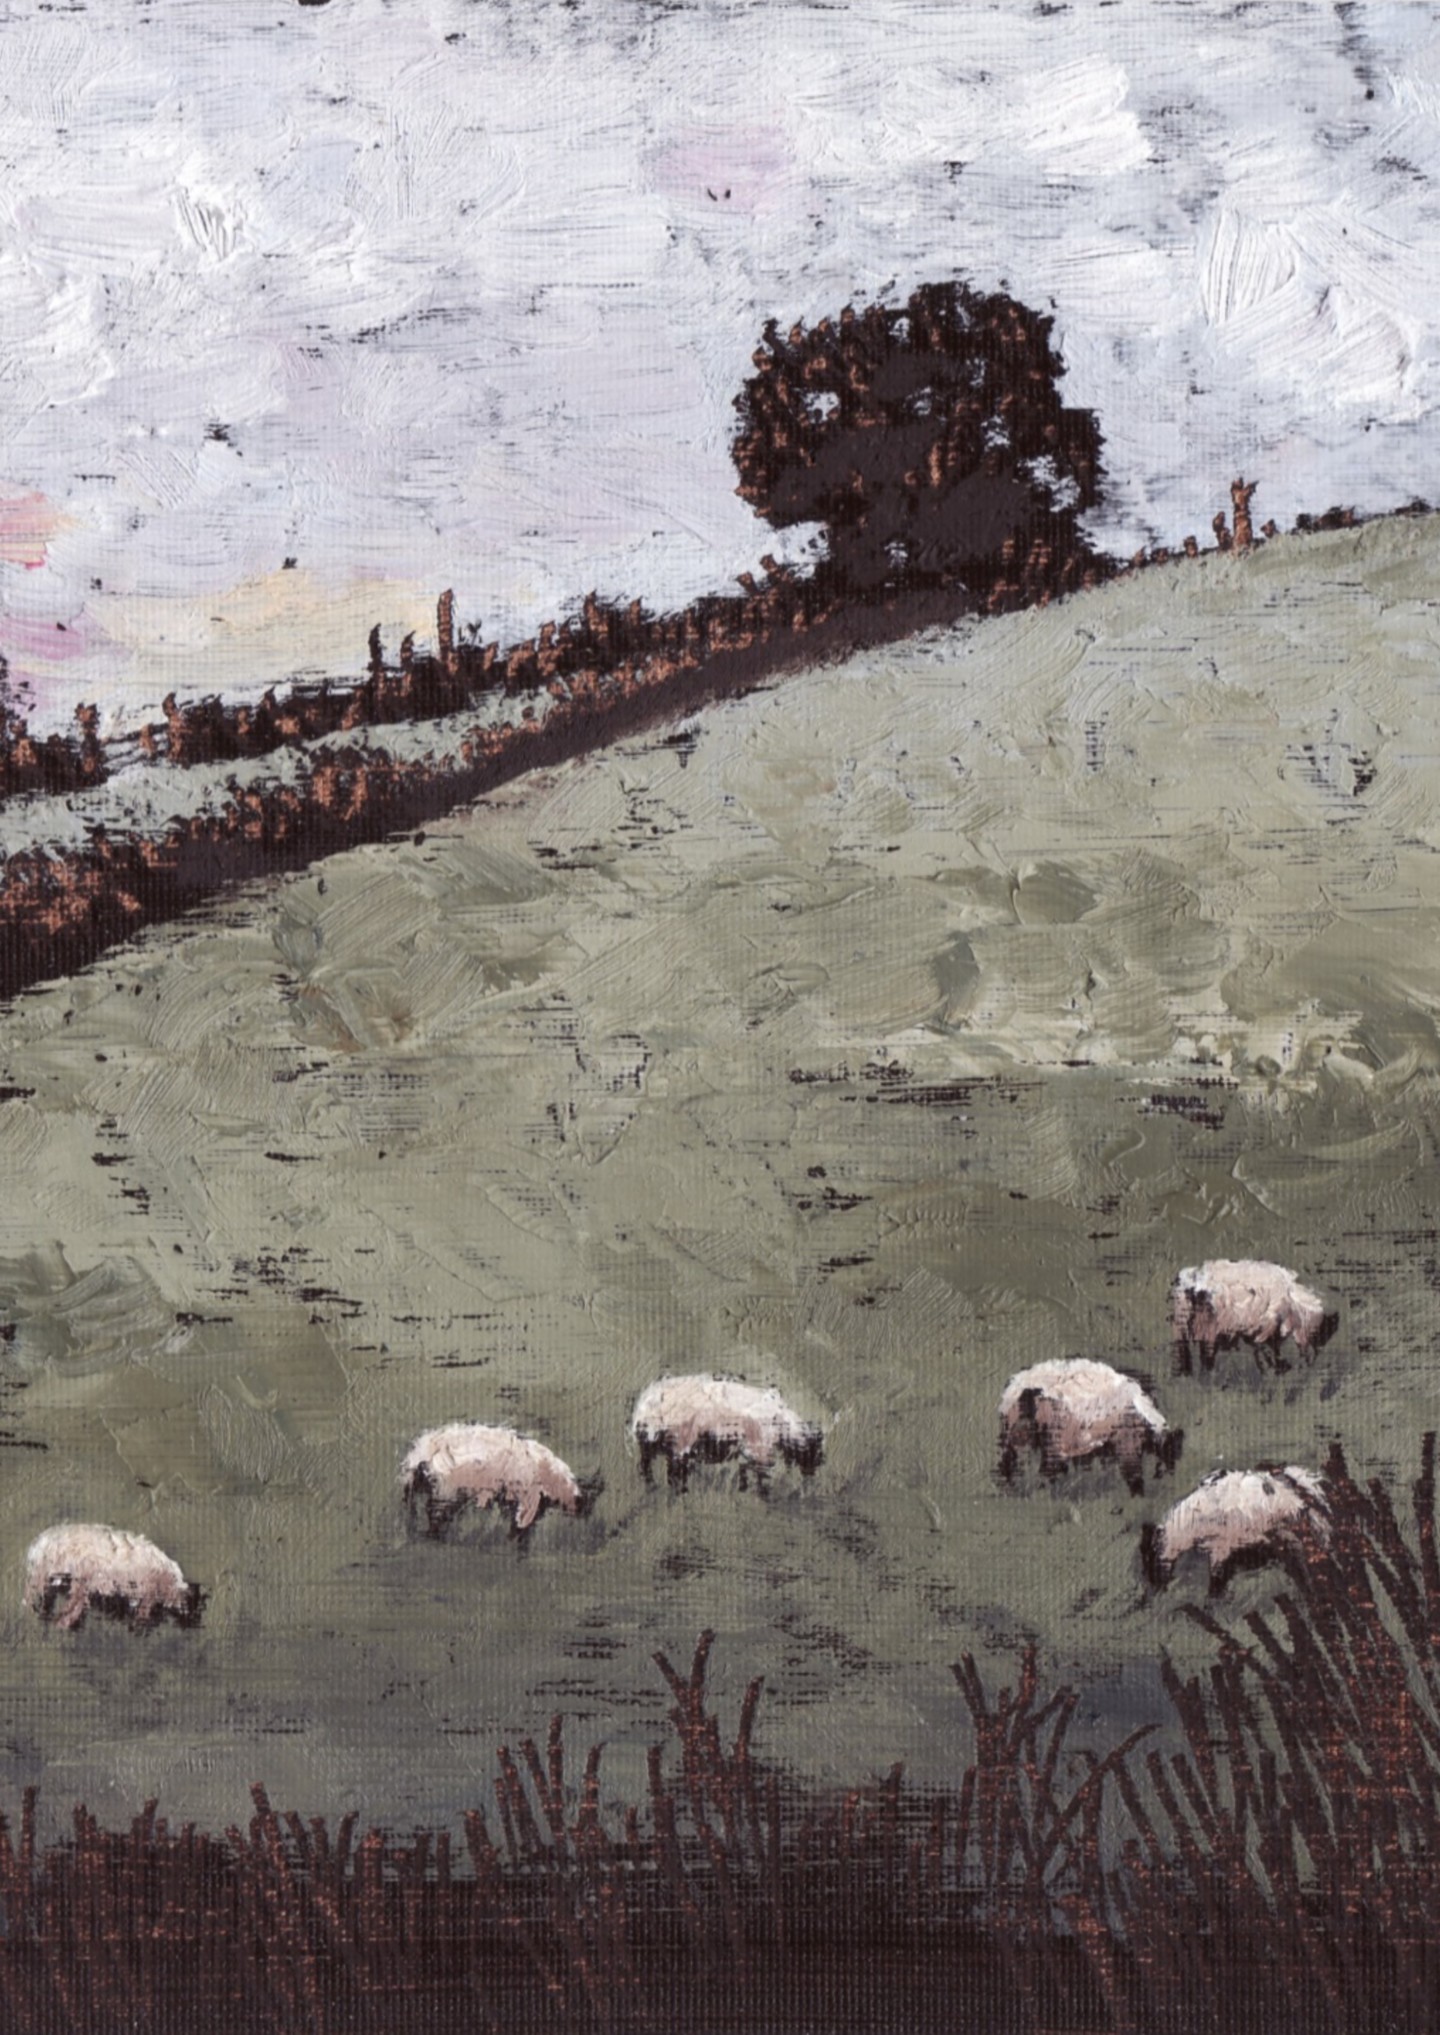 Micheal O Muirthile - The Sheep in Connie's Field